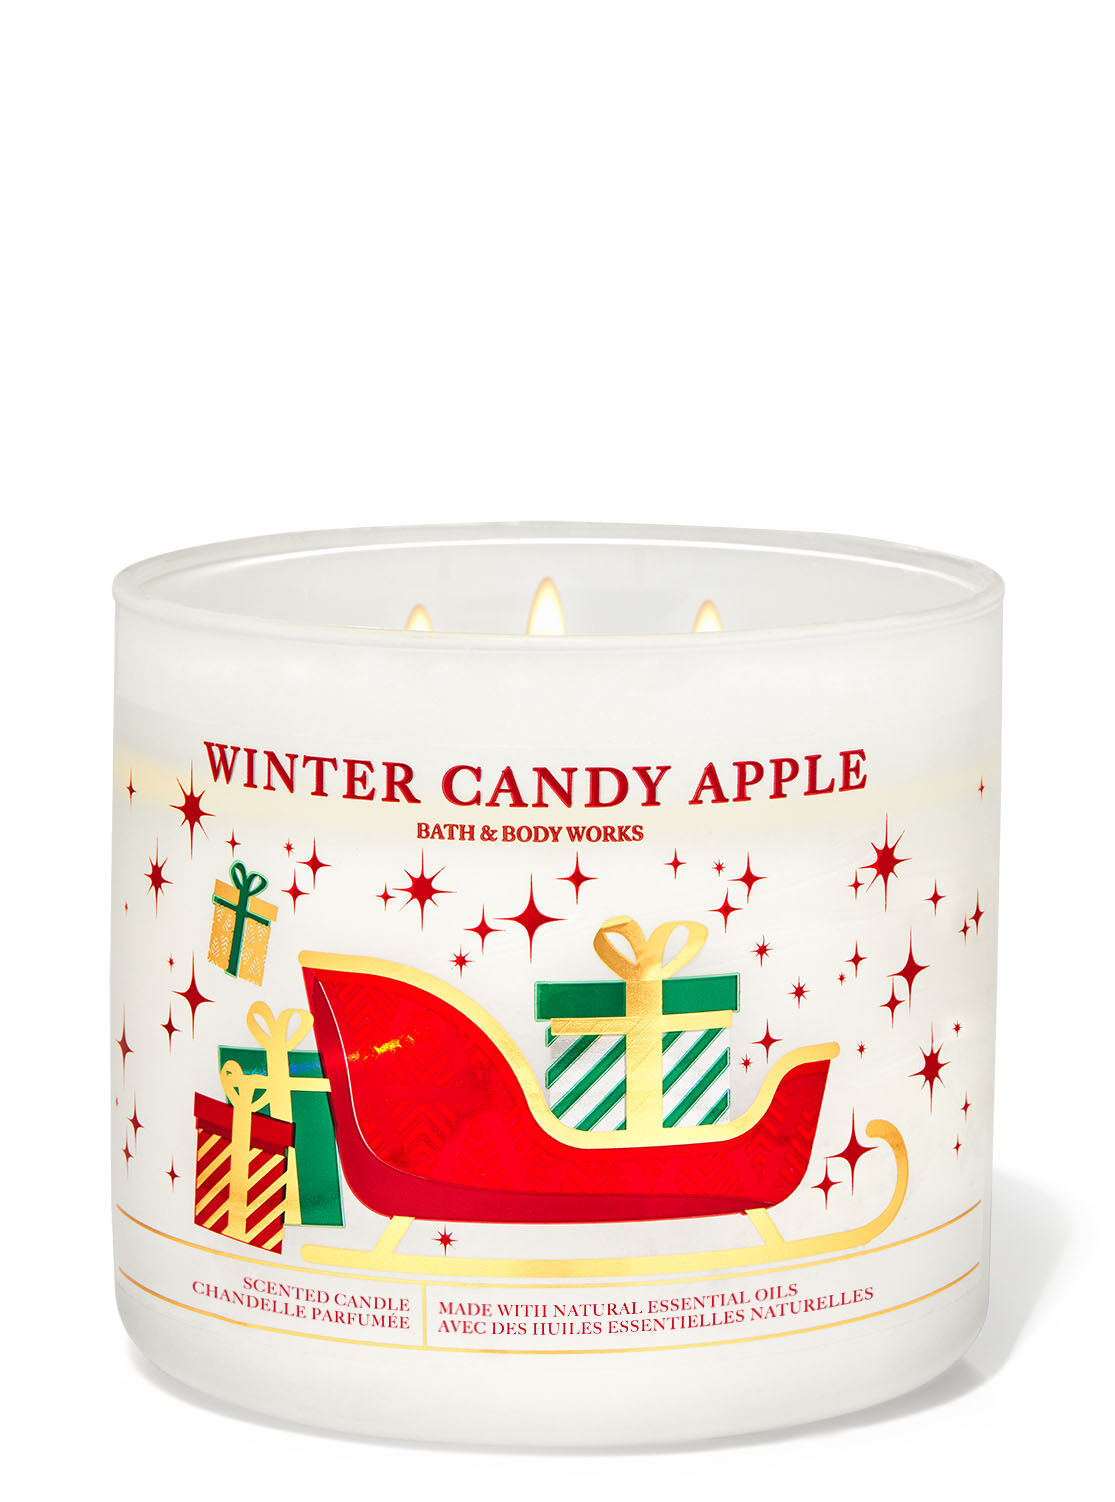 NEW Bath & Body Works WINTER CANDY APPLE 3-Wick Scented Candle 14.5 oz 